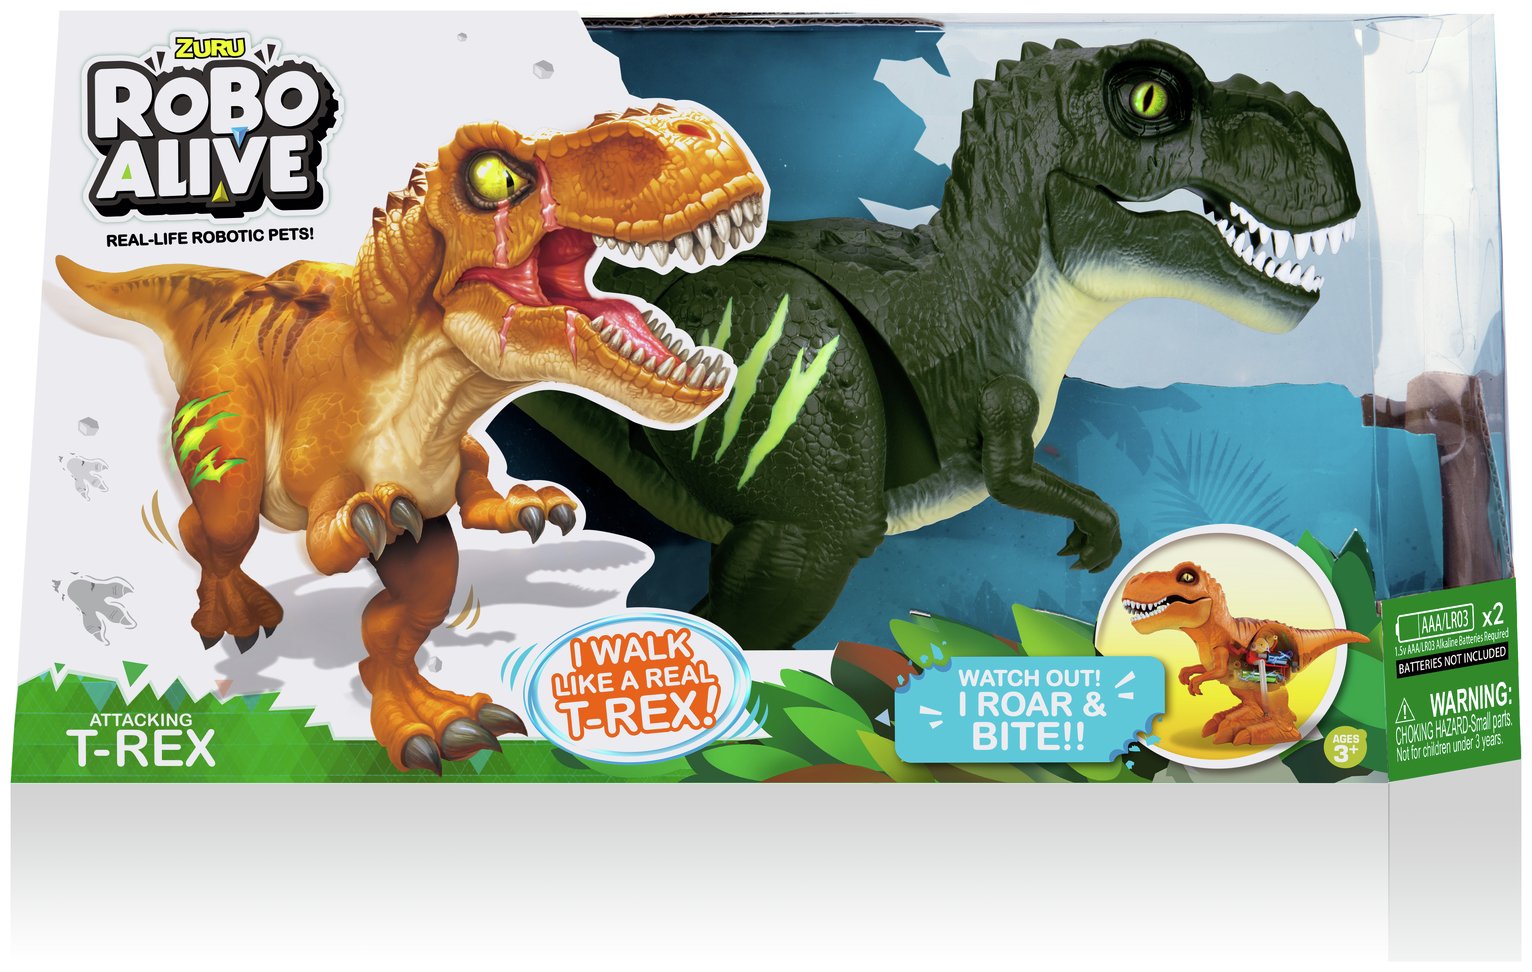 Robo Alive Attacking T-Rex Series 1 Dino Review